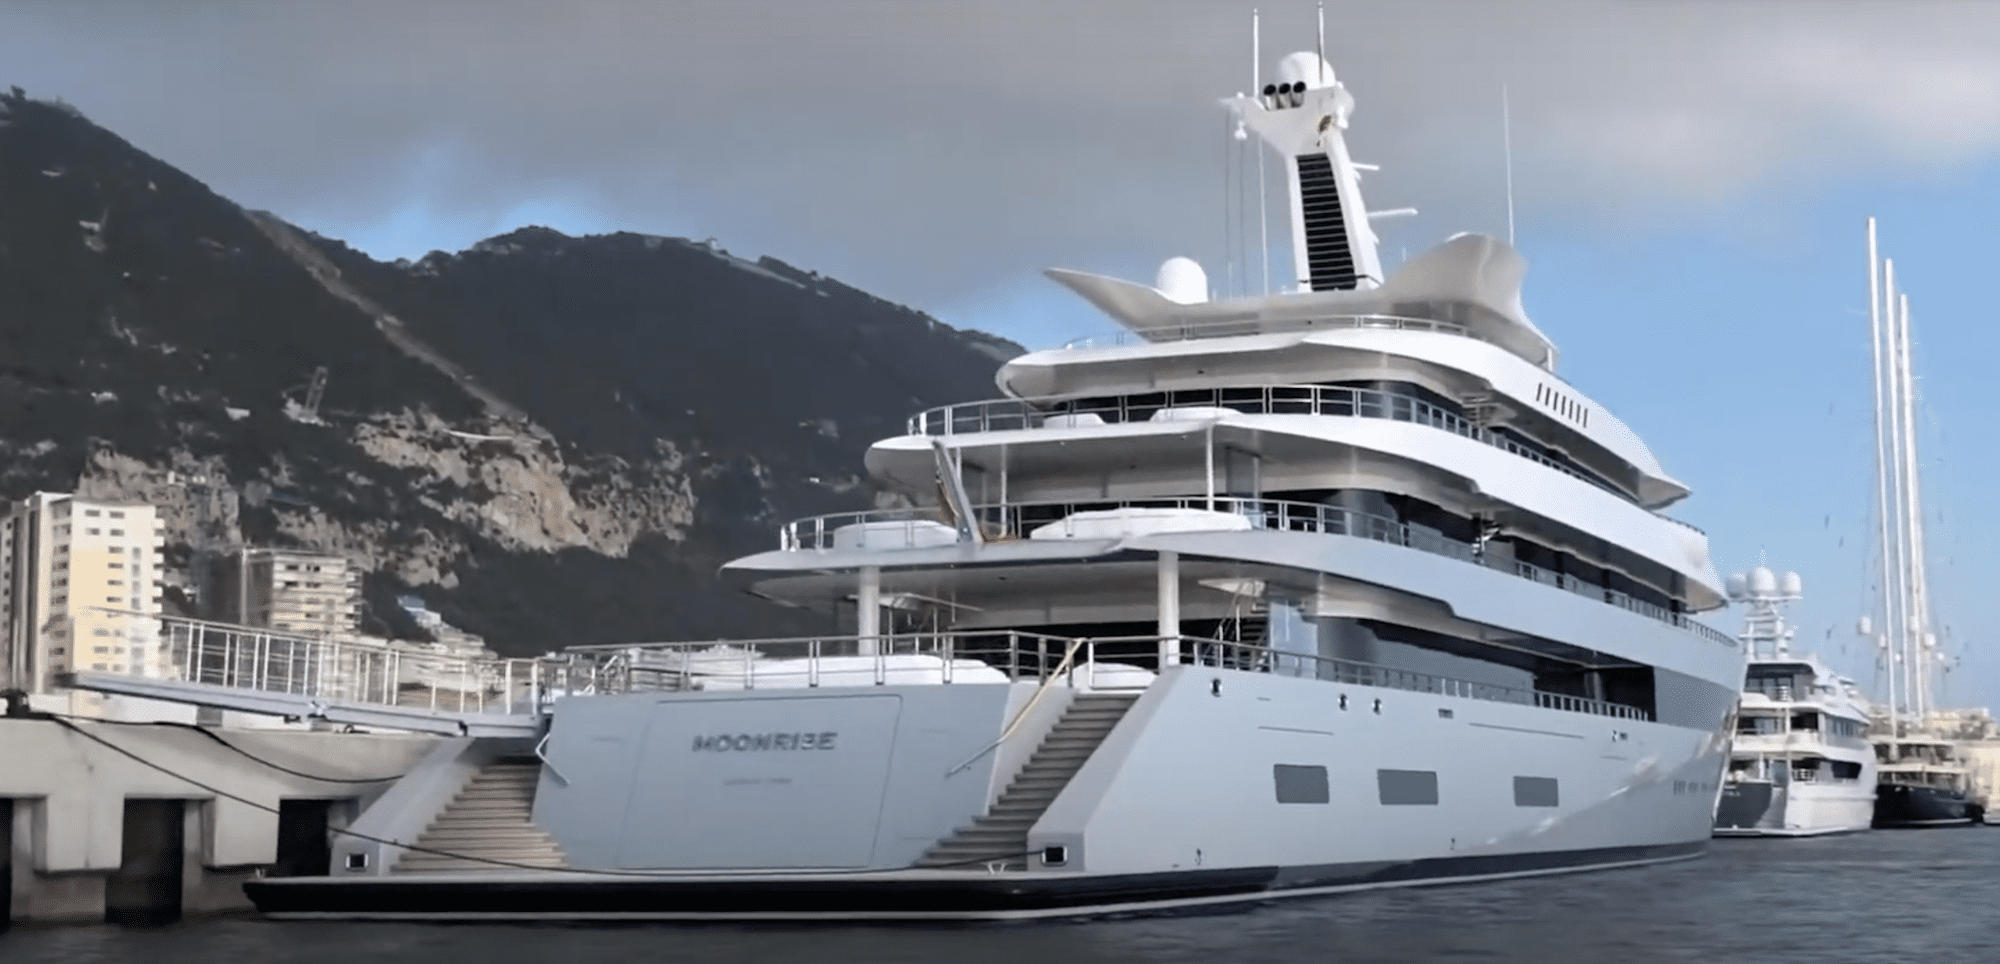 99.95-metre Moonrise - the largest superyacht by waterline length